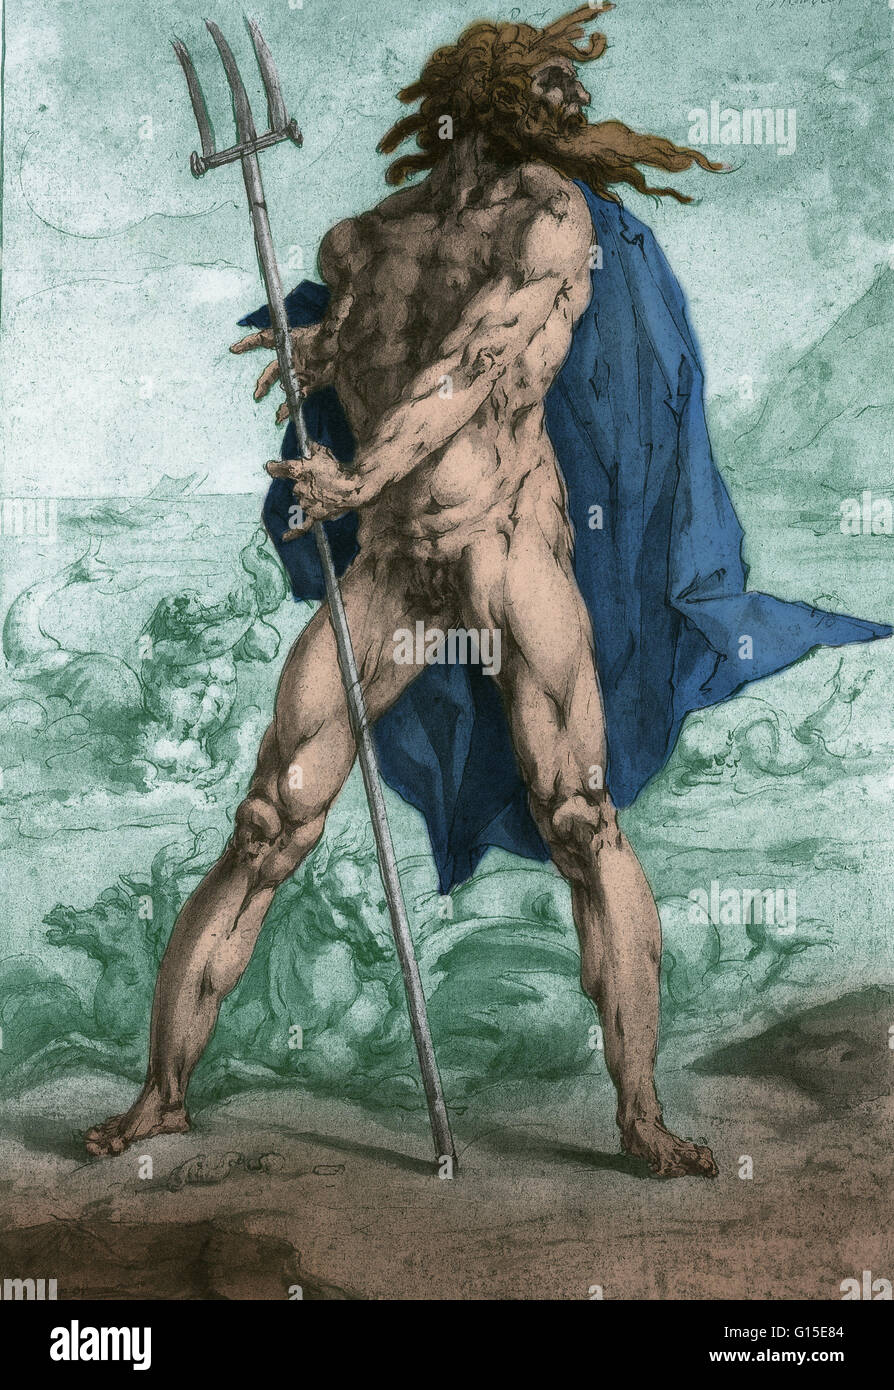 A drawing by Jan Harmensz Muller (1571-1628) of Neptune with his trident and horses. Neptune was the Roman god of freshwater and the sea in Roman religion. He is the counterpart of the Greek god Poseidon. In the Greco-Roman mythology, he was the brother o Stock Photo